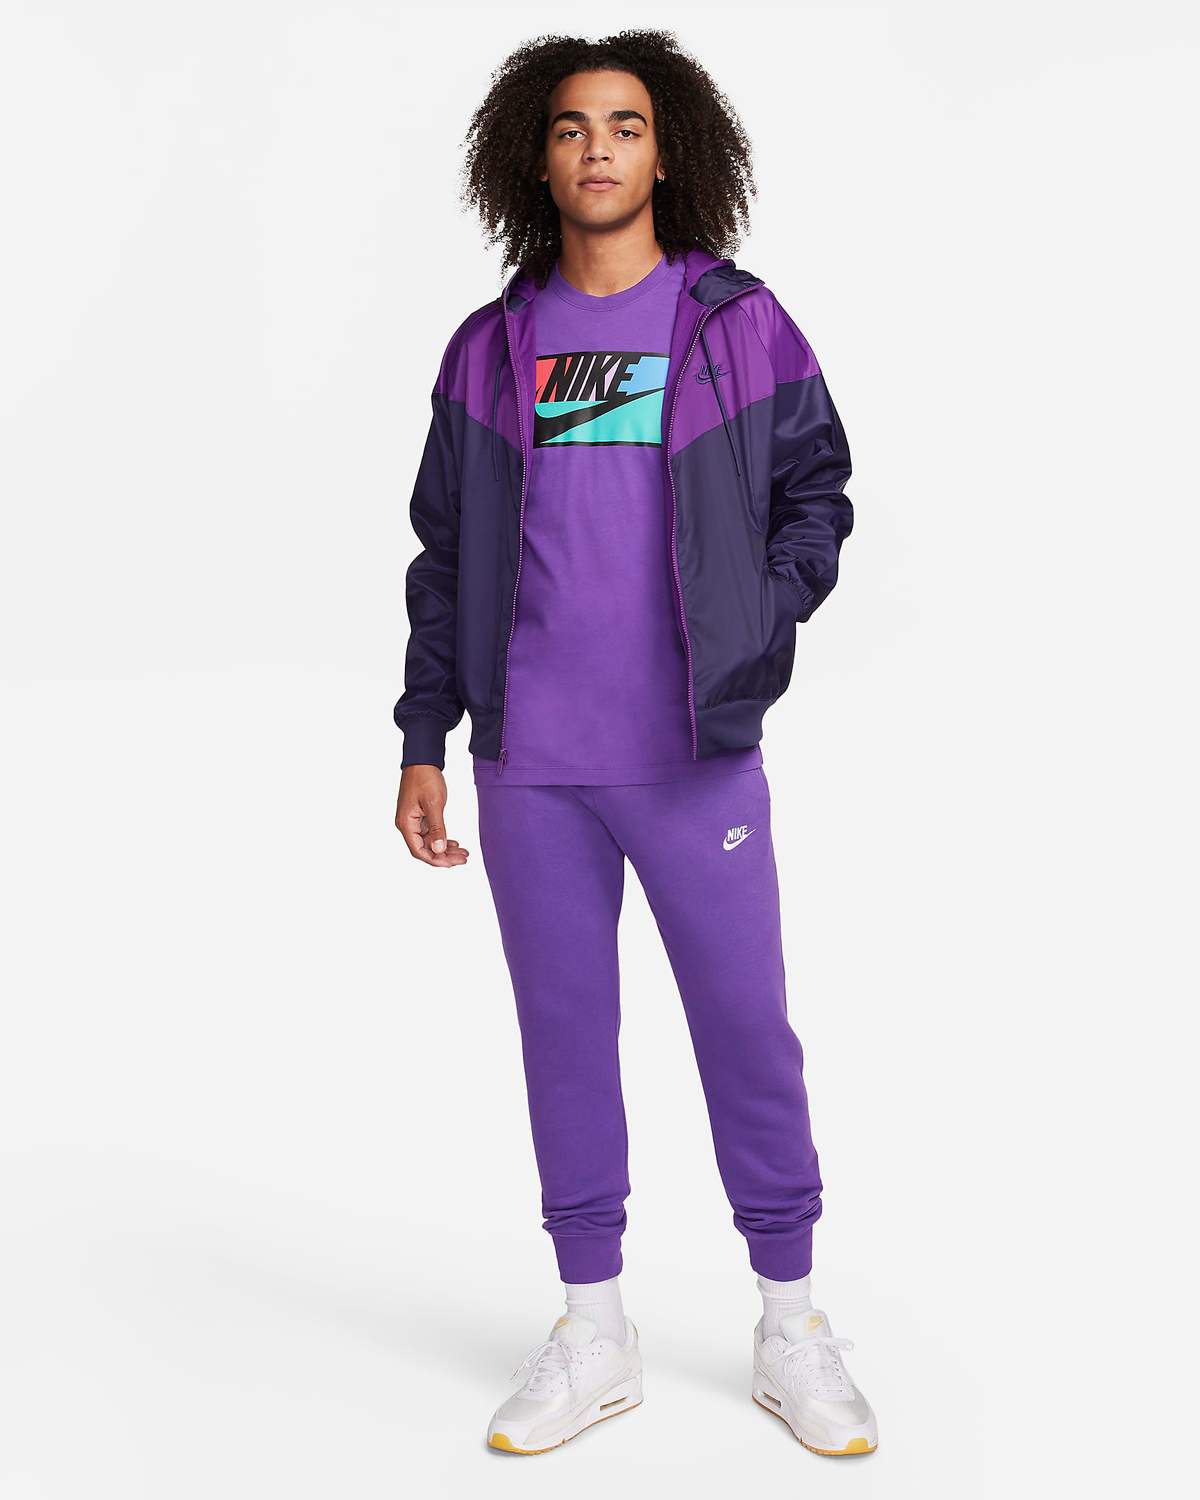 Nike-Sportswear-Patch-T-Shirt-Purple-Cosmos-Outfit